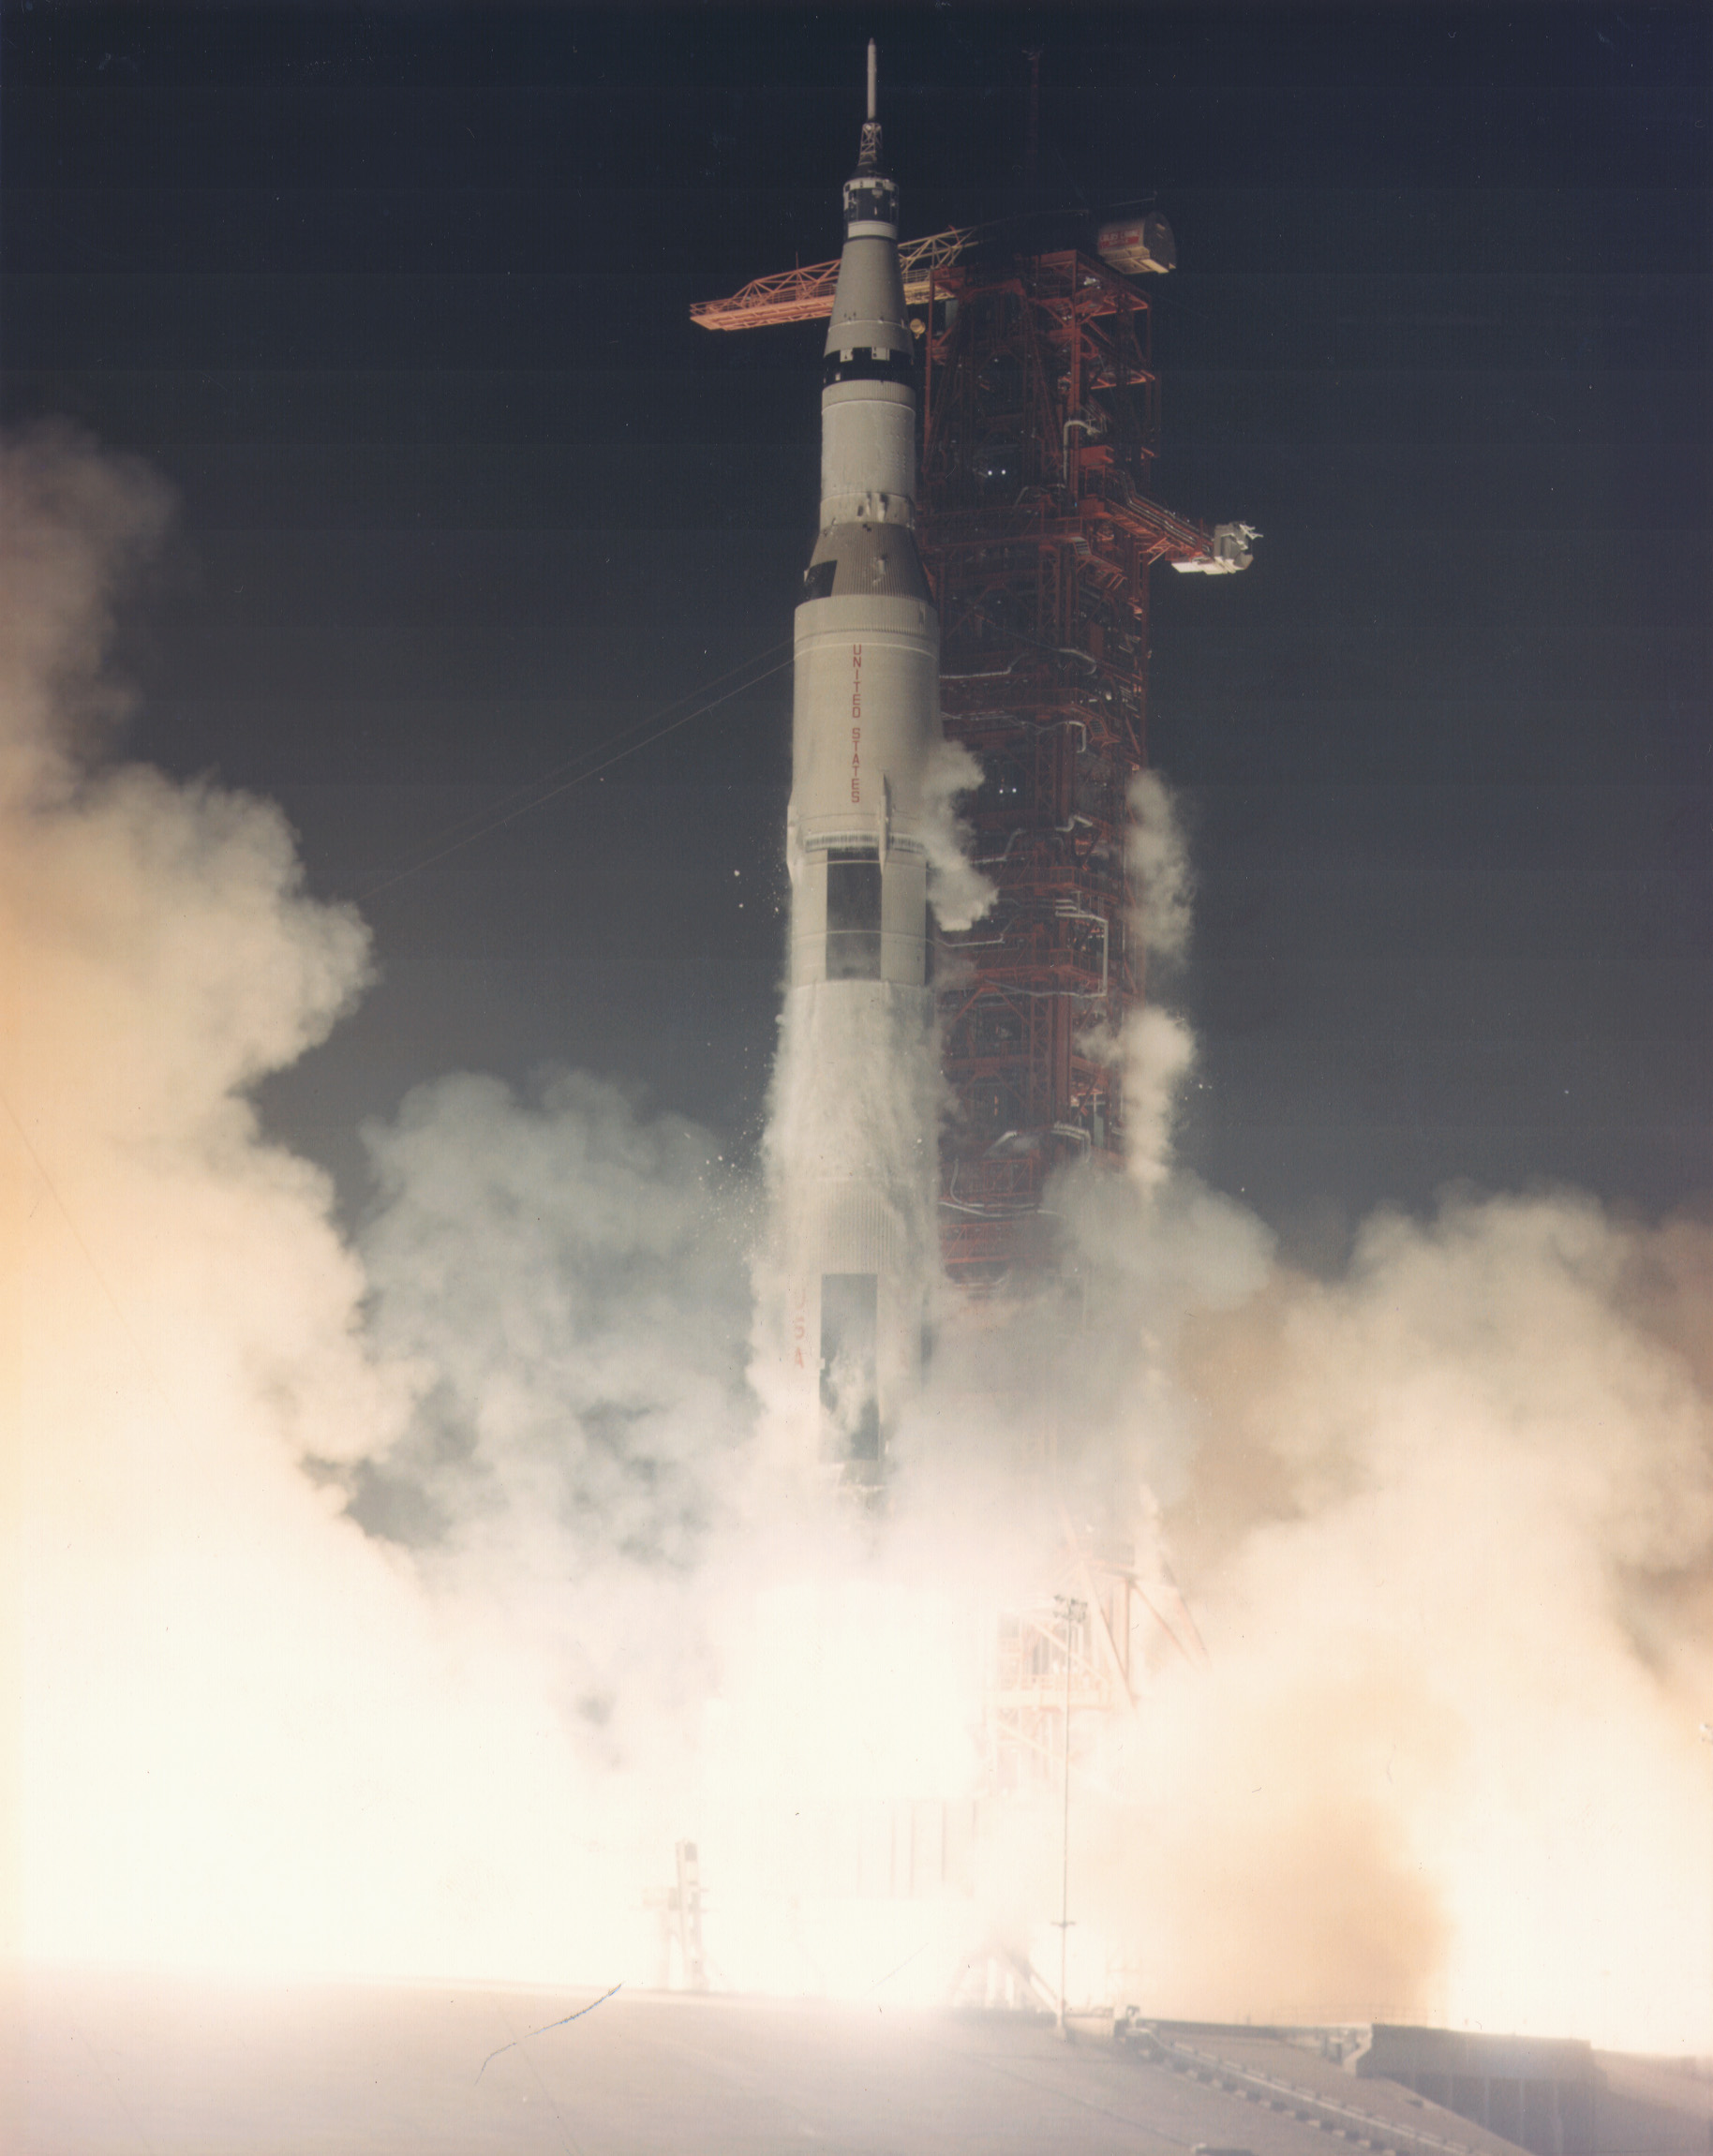 Apollo 17 (AS-512) lifts off from Launch Complex 39A at 05:33:00 UTC, 7 December 1972. (NASA)